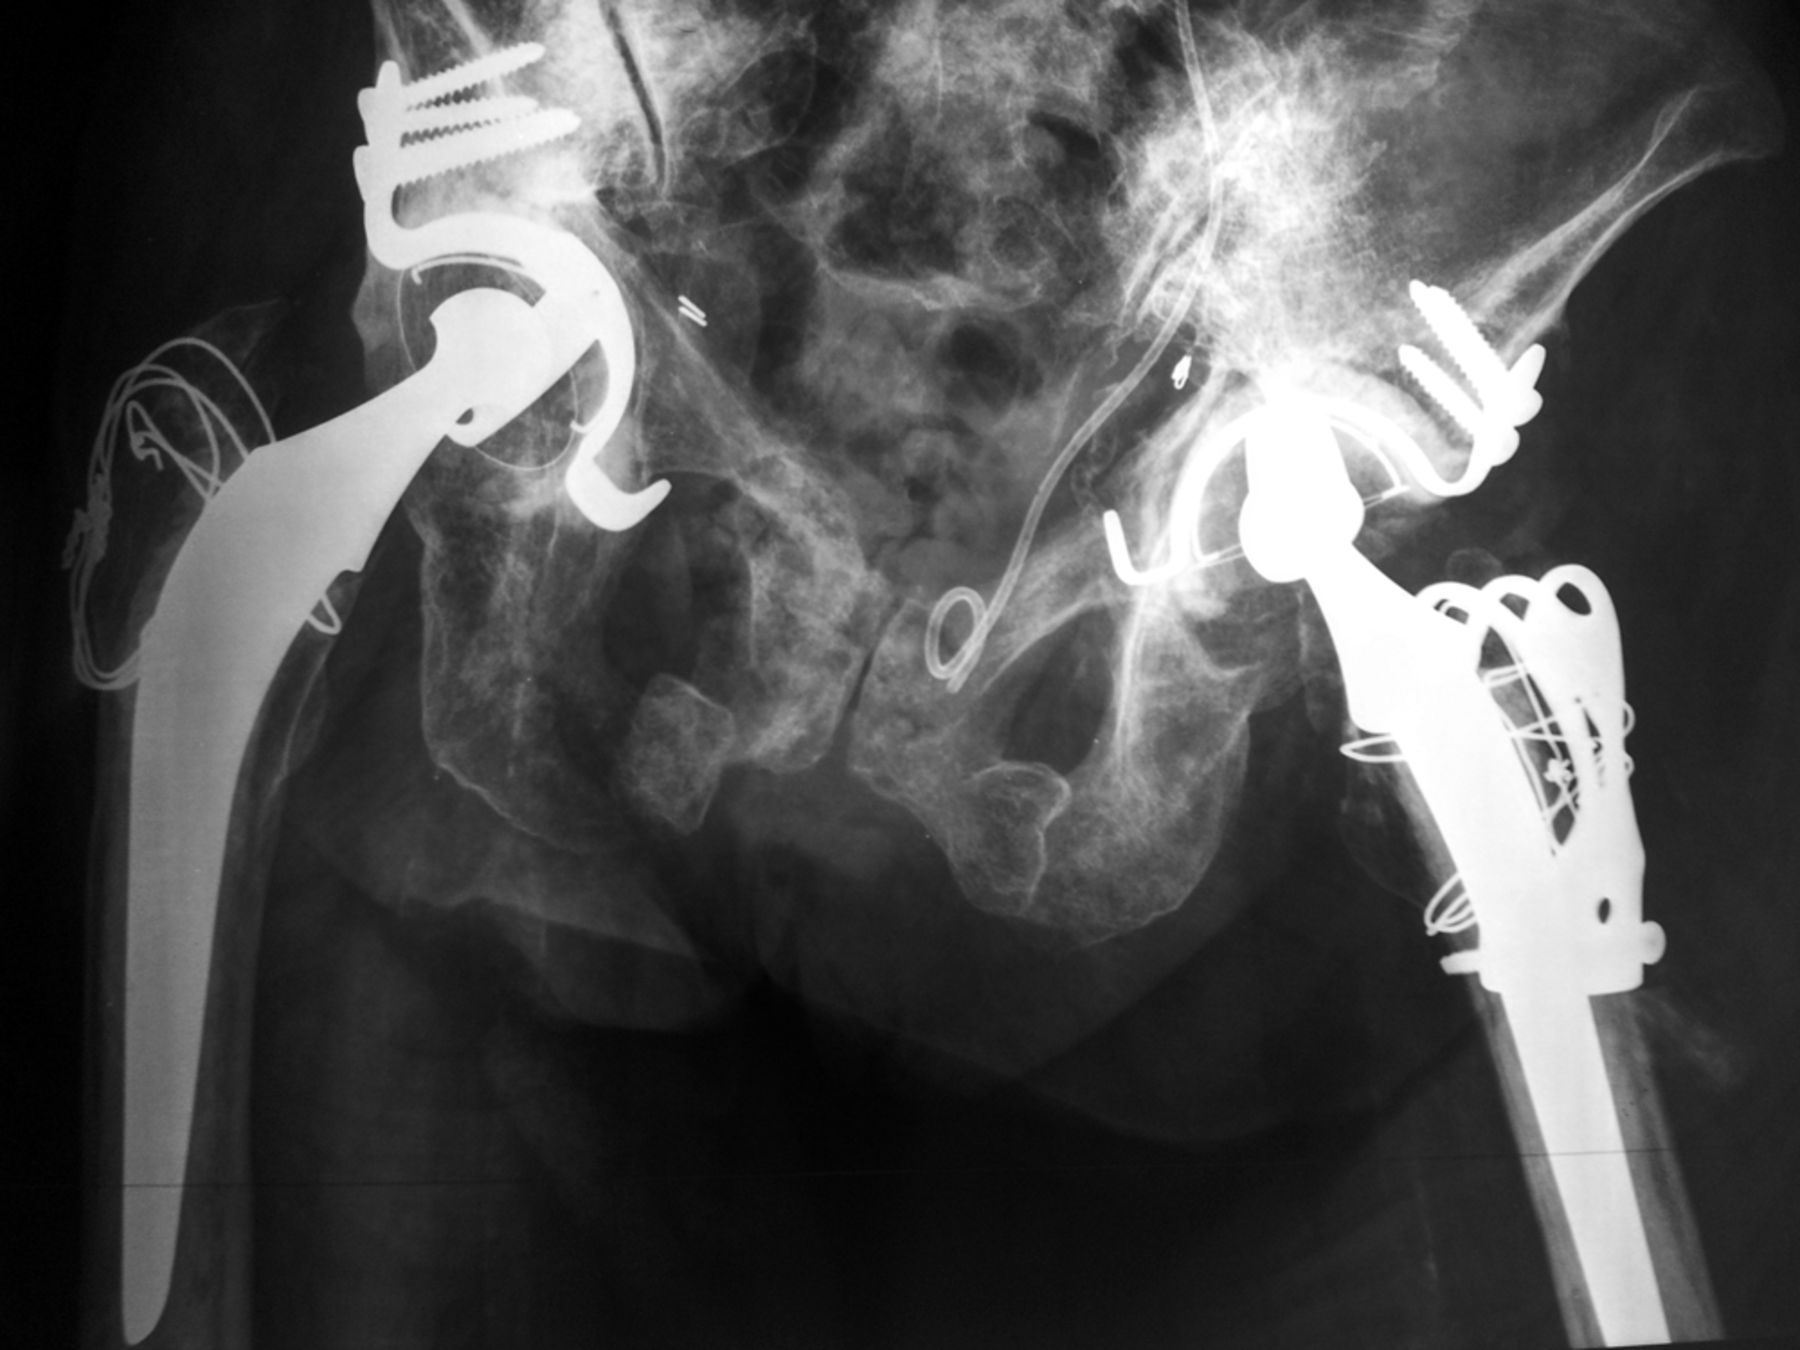 Fig. 6 
          Anteroposterior radiograph of a 56-year-old patient
showing mechanical loosening of the left acetabular component 34 months
after a primary cemented total hip arthroplasty with an acetabular reinforcement
cross and significant radiation osteitis of the pelvis
        